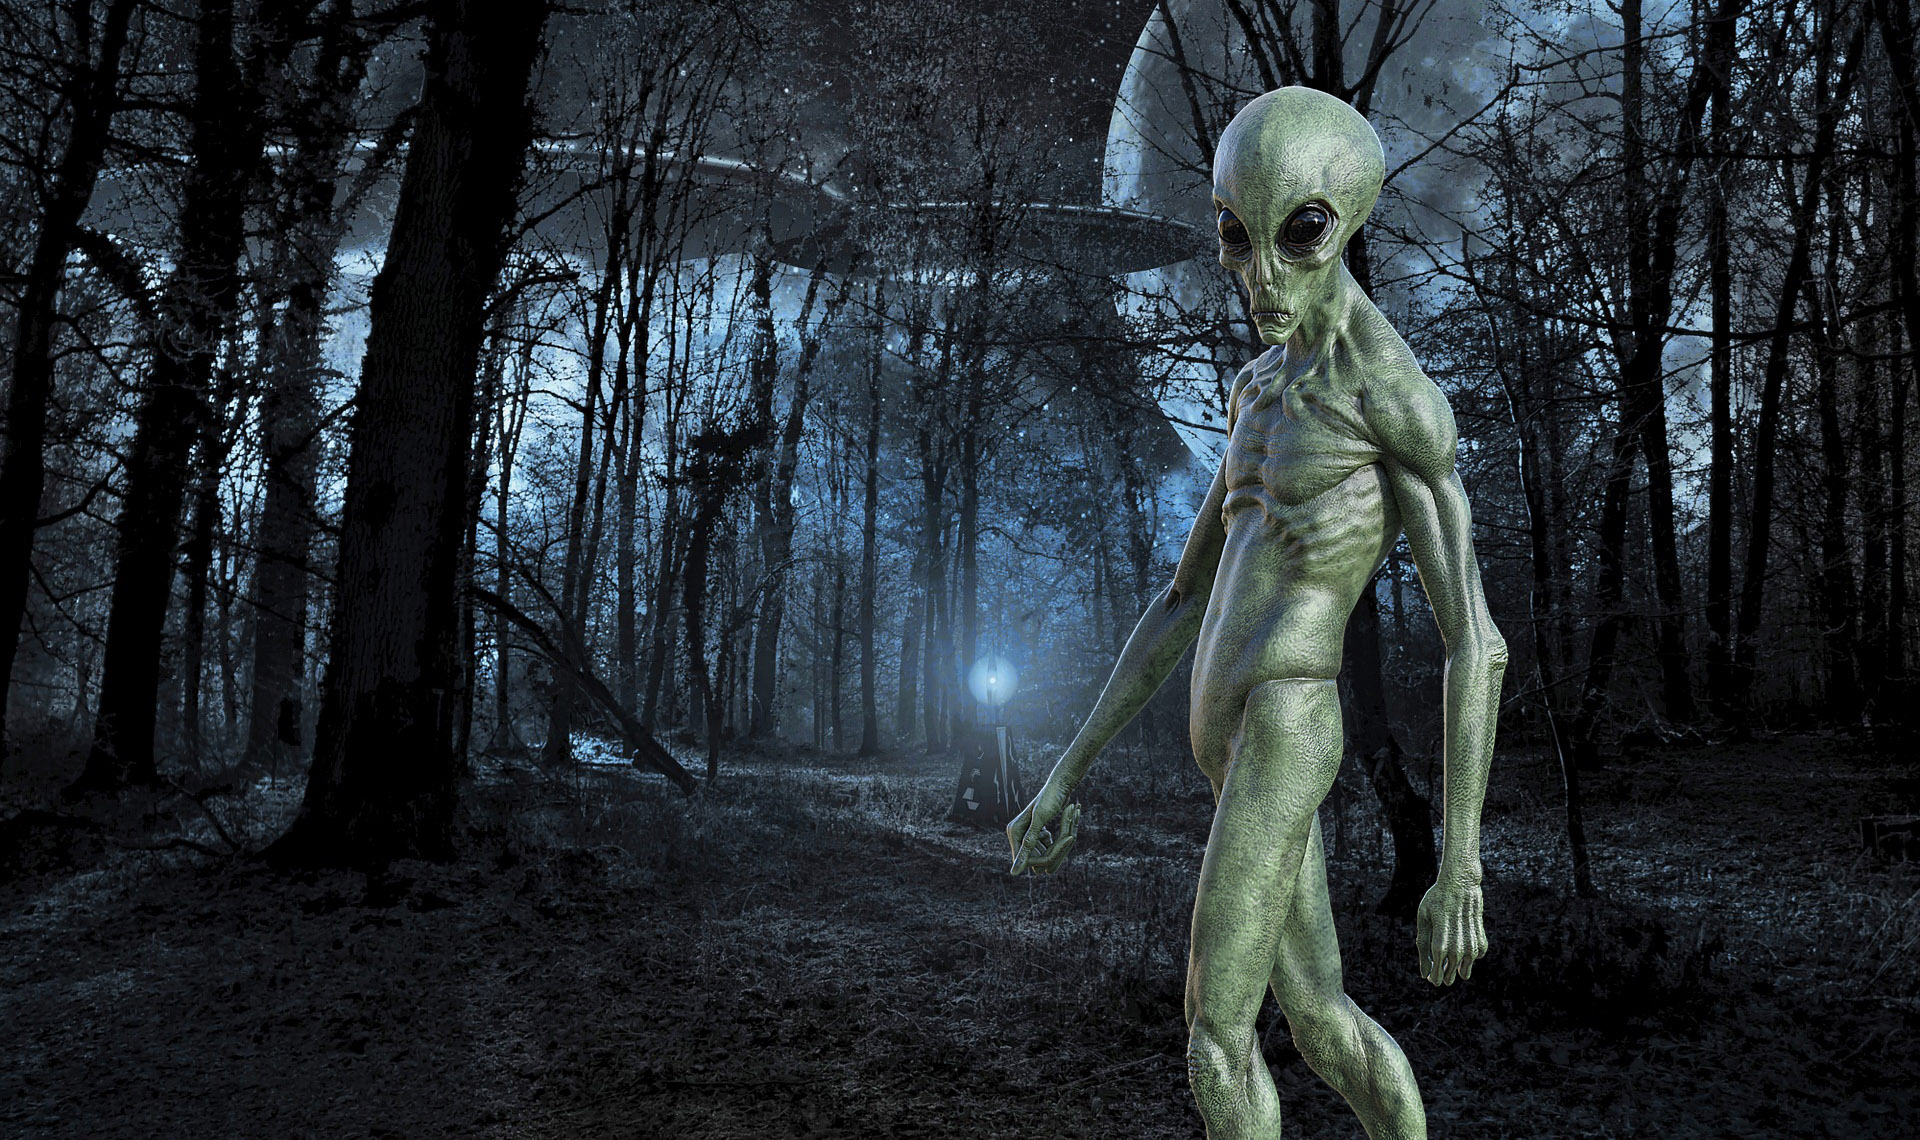 U.S. Space Expert Claims Alien Life Forms May Have Previously Existed